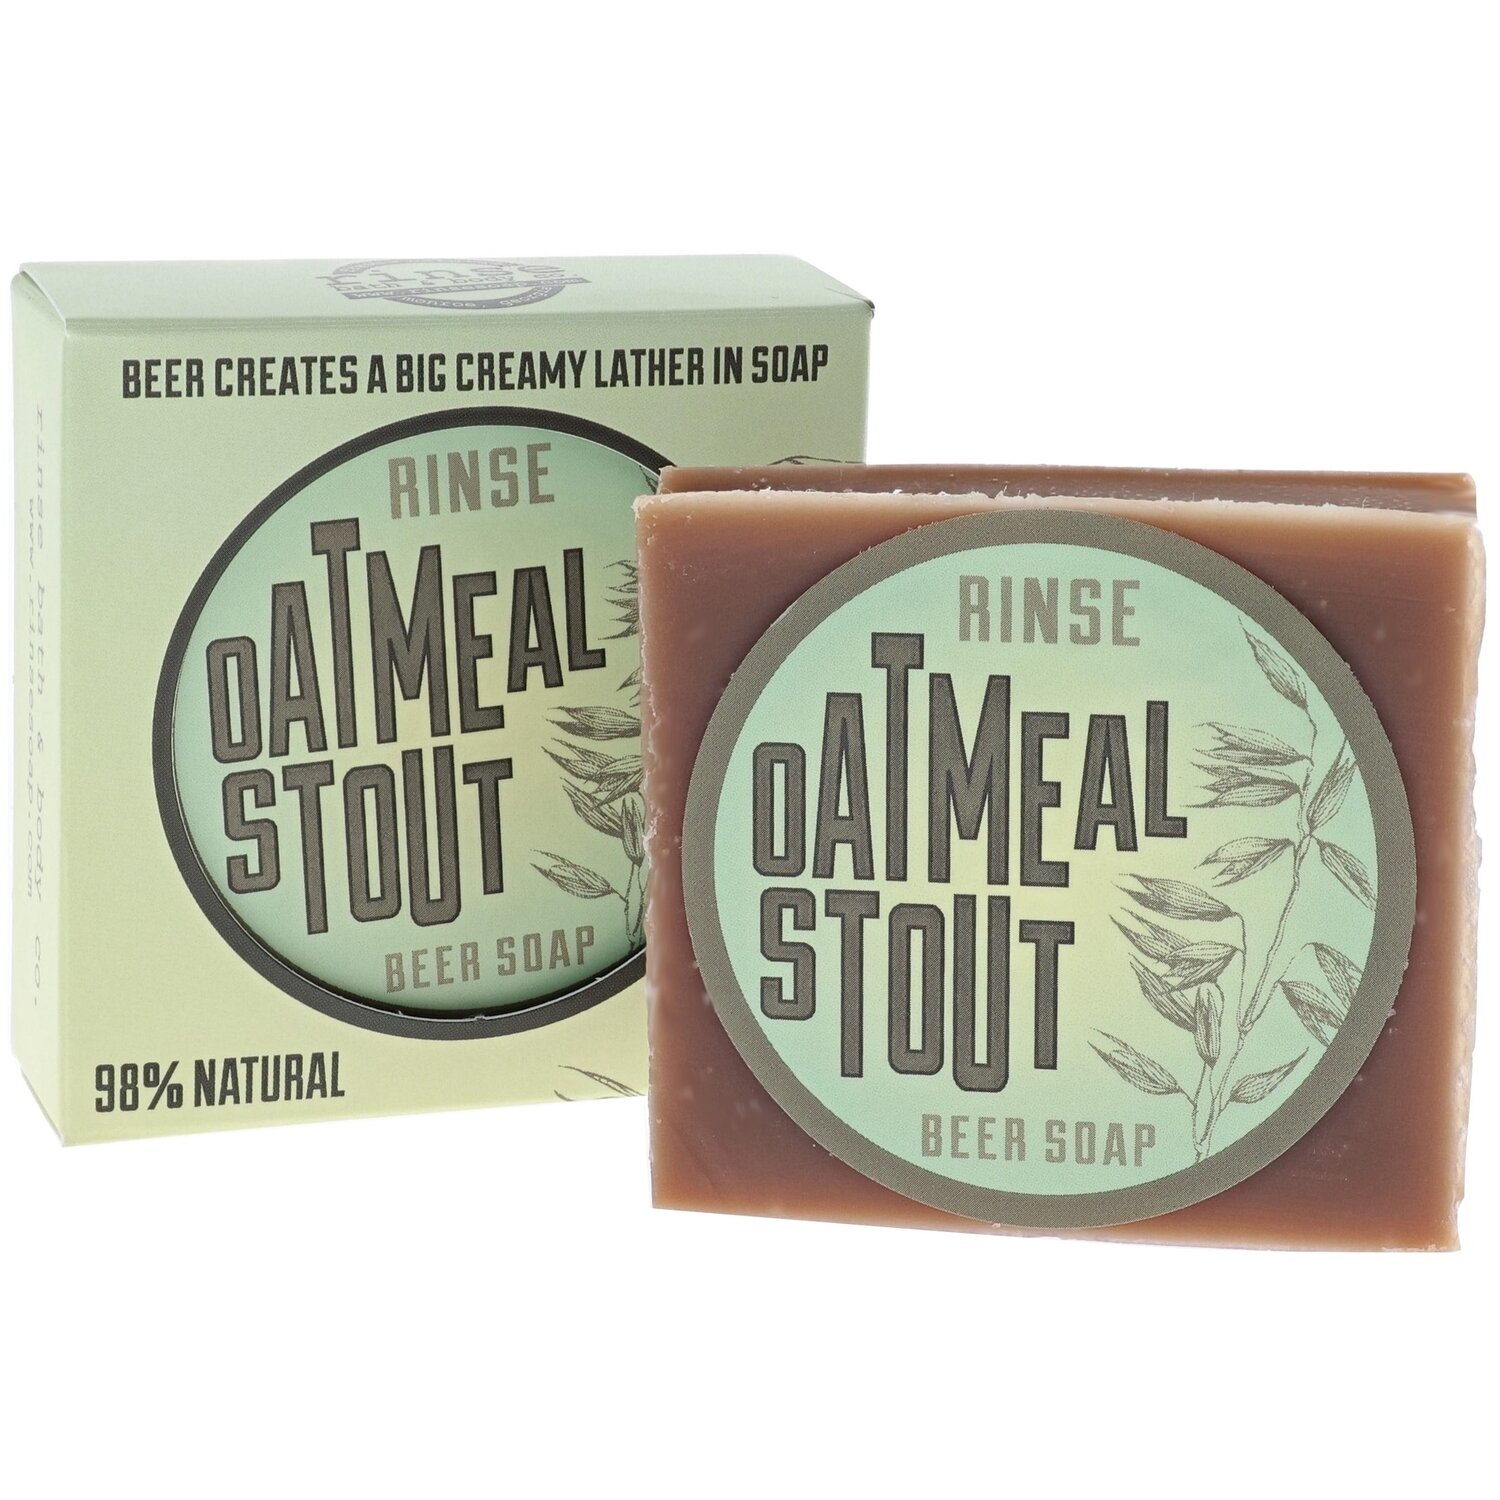 Rinse Oatmeal Stout Beer Soap